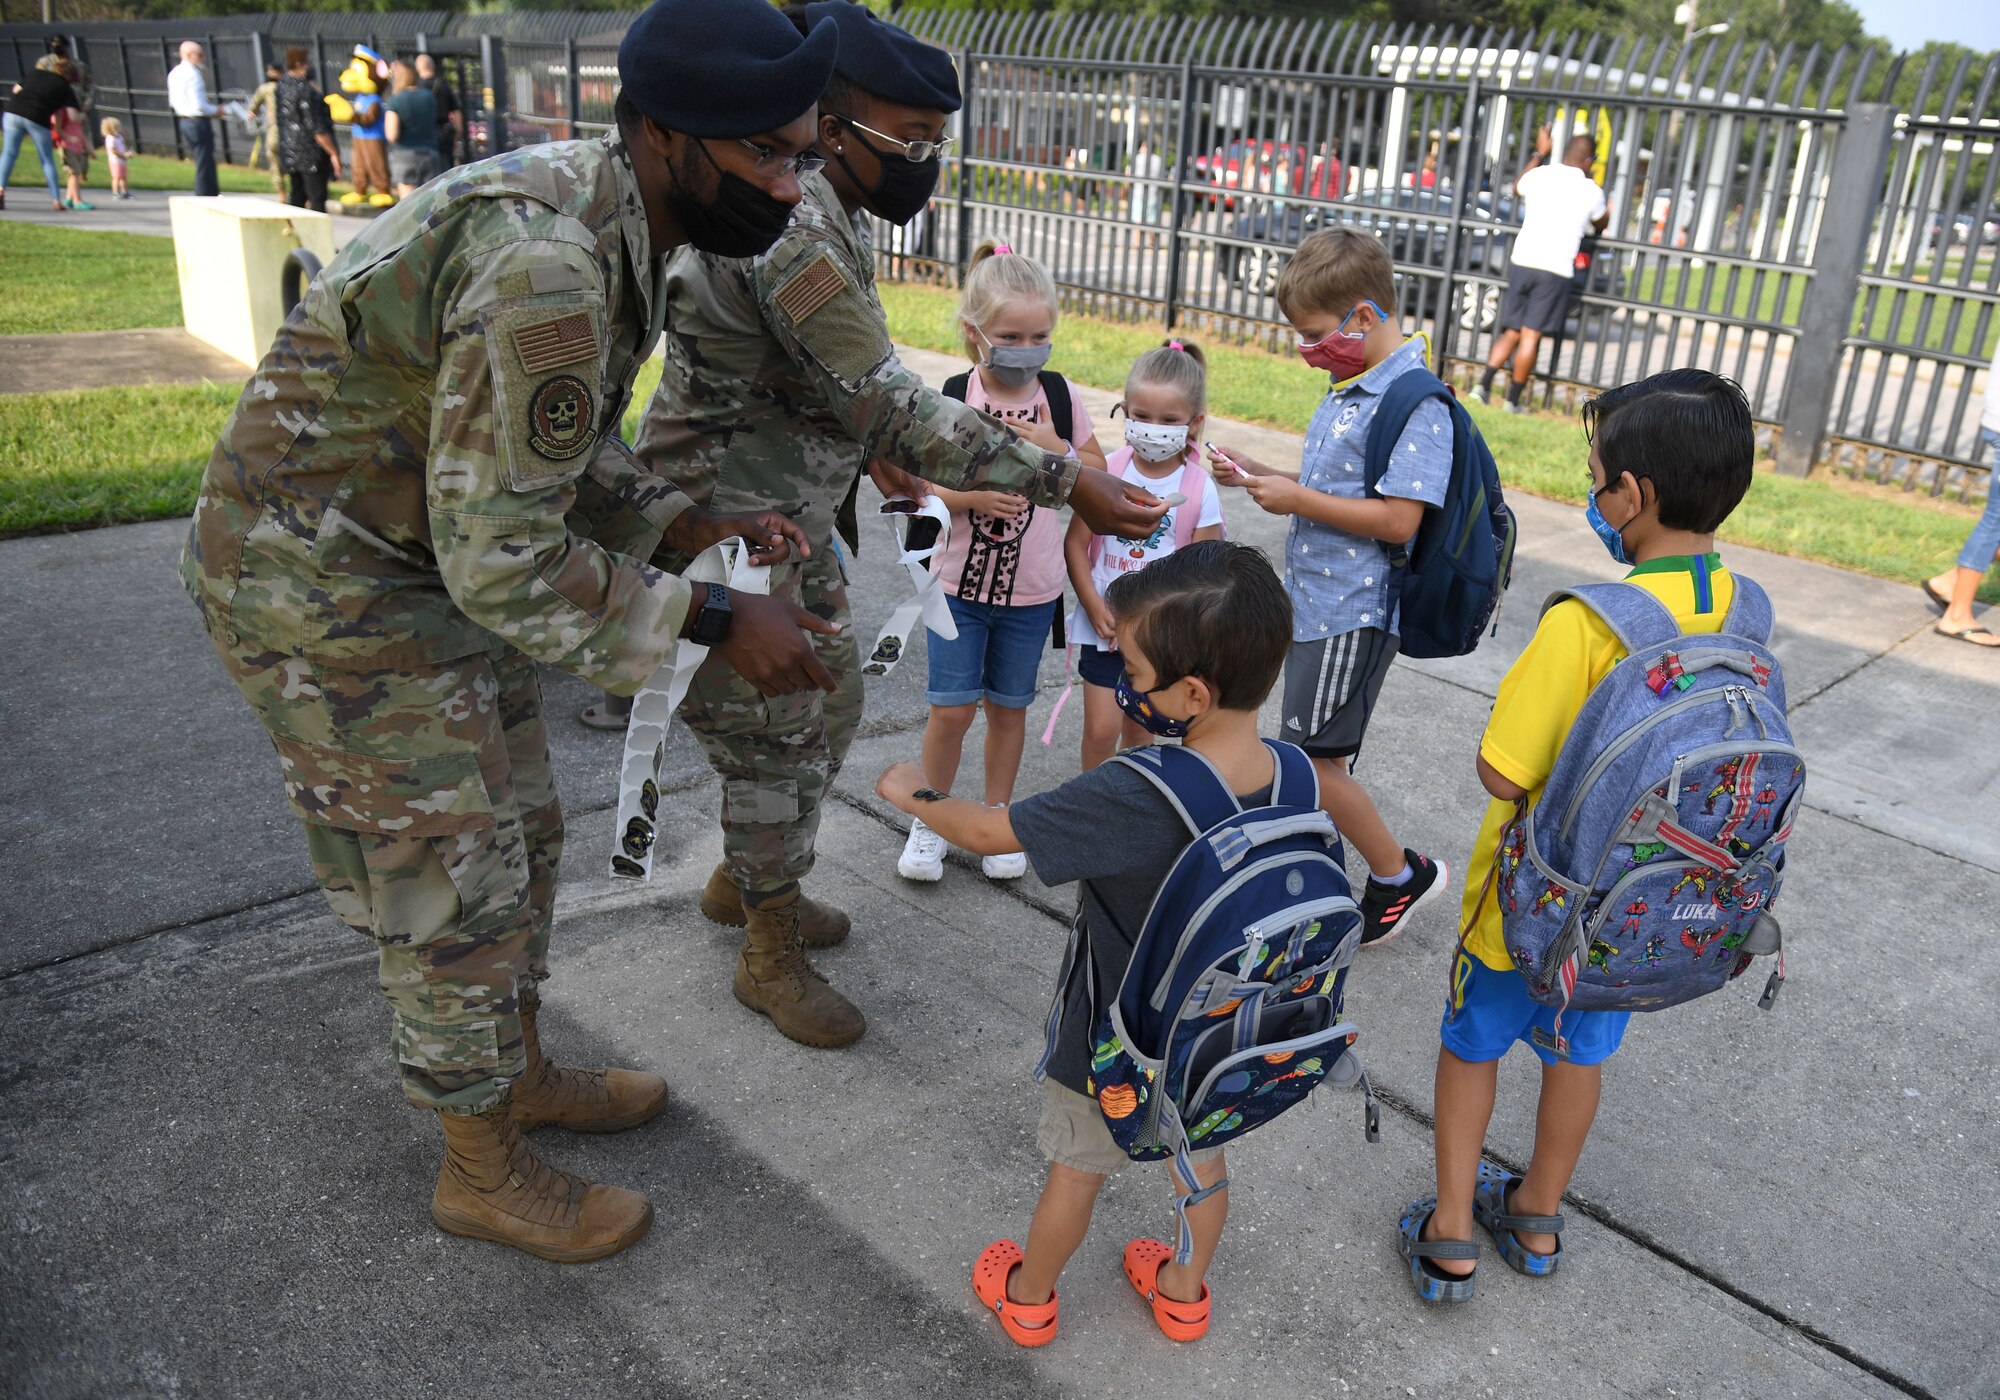 U.S. Air Force Airman 1st Class LaDarian Carter, 81st Security Forces Squadron base defense operations center controller, and Senior Airman Jocilyn Carver, 81st SFS entry controller, passes out stickers to military children at Keesler Air Force Base, Mississippi, Aug. 4, 2021. Members from the 81st SFS greeted children as they went to Jeff Davis Elementary School on their first day of school. (U.S. Air Force photo by Kemberly Groue)